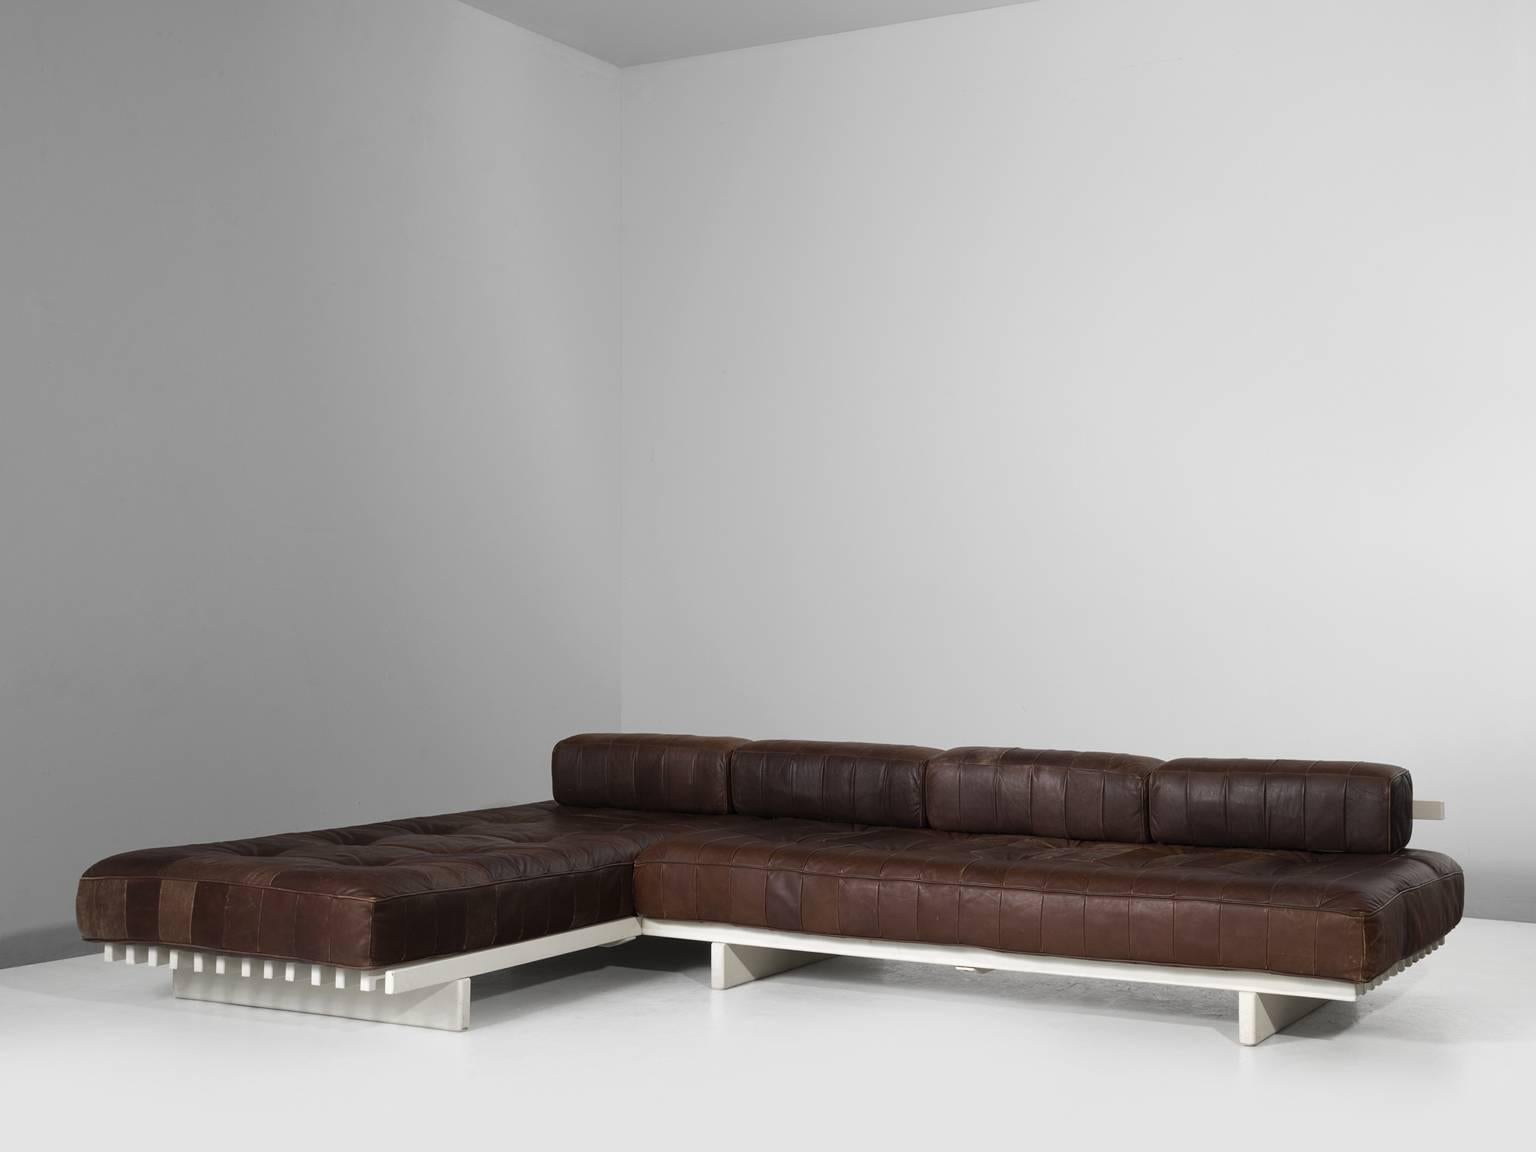 DS80 sofa, in leather and wood, by De Sede, Switzerland 1970s.

Sectional sofa by the Swiss quality manufacturer Desede. This sofa consists of two combined daybeds. The frame consists of white lacquered wooden slats. The cushions are upholstered